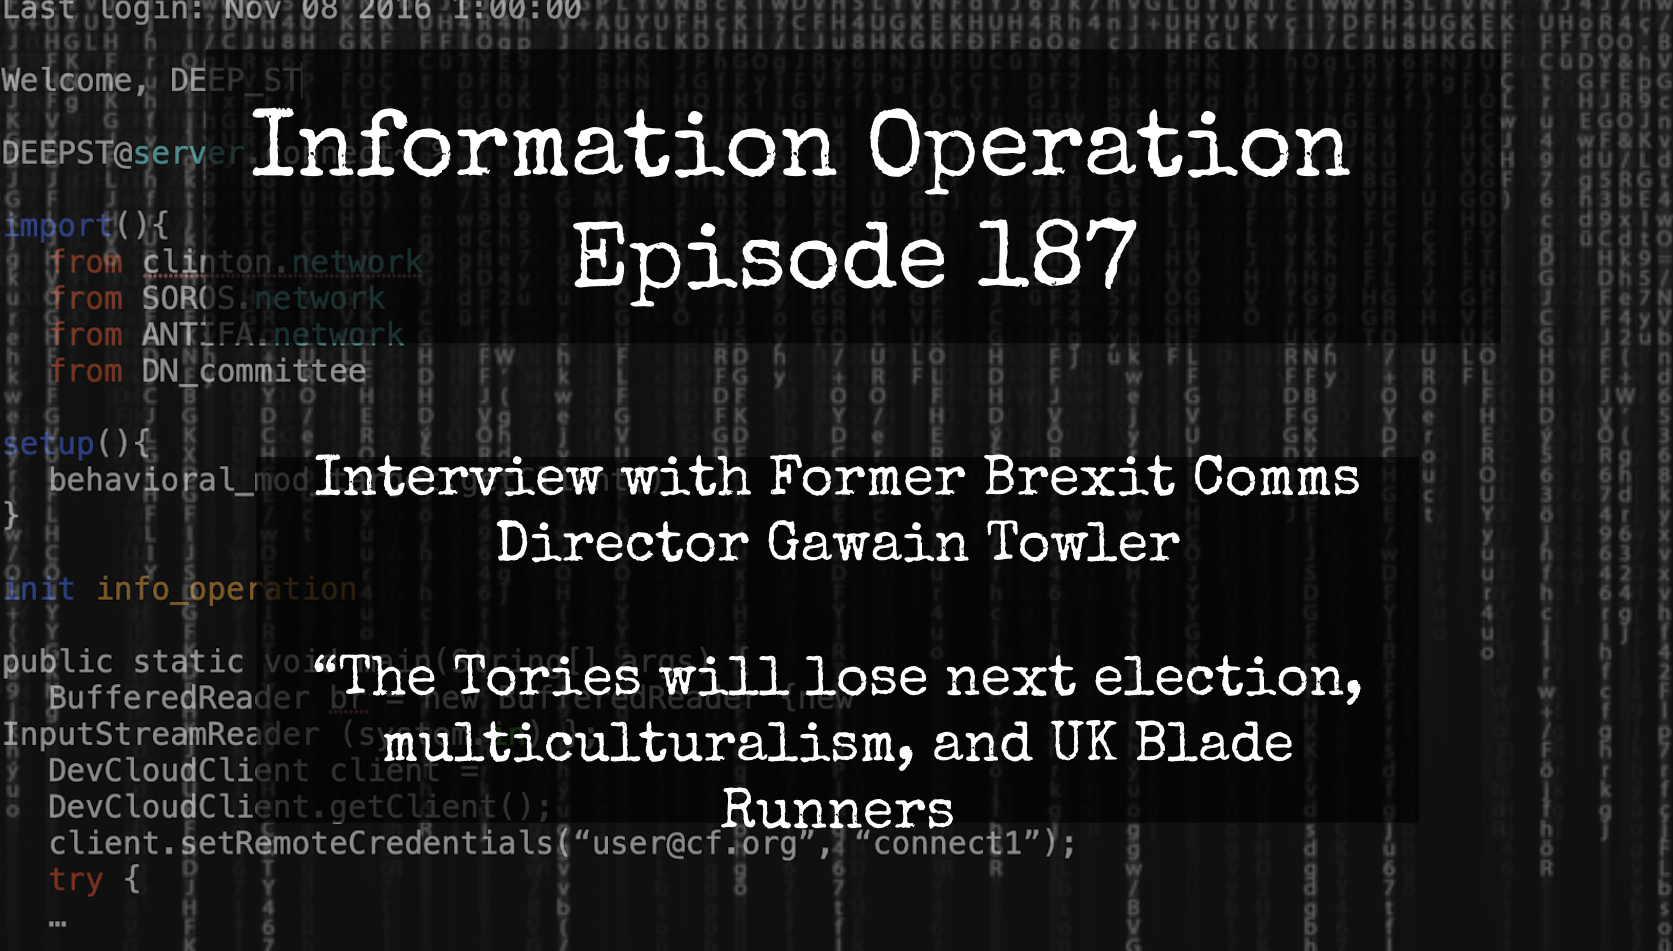 LIVE 7pm EST: Information Operation With Brexit Party #2 Gawain Towler